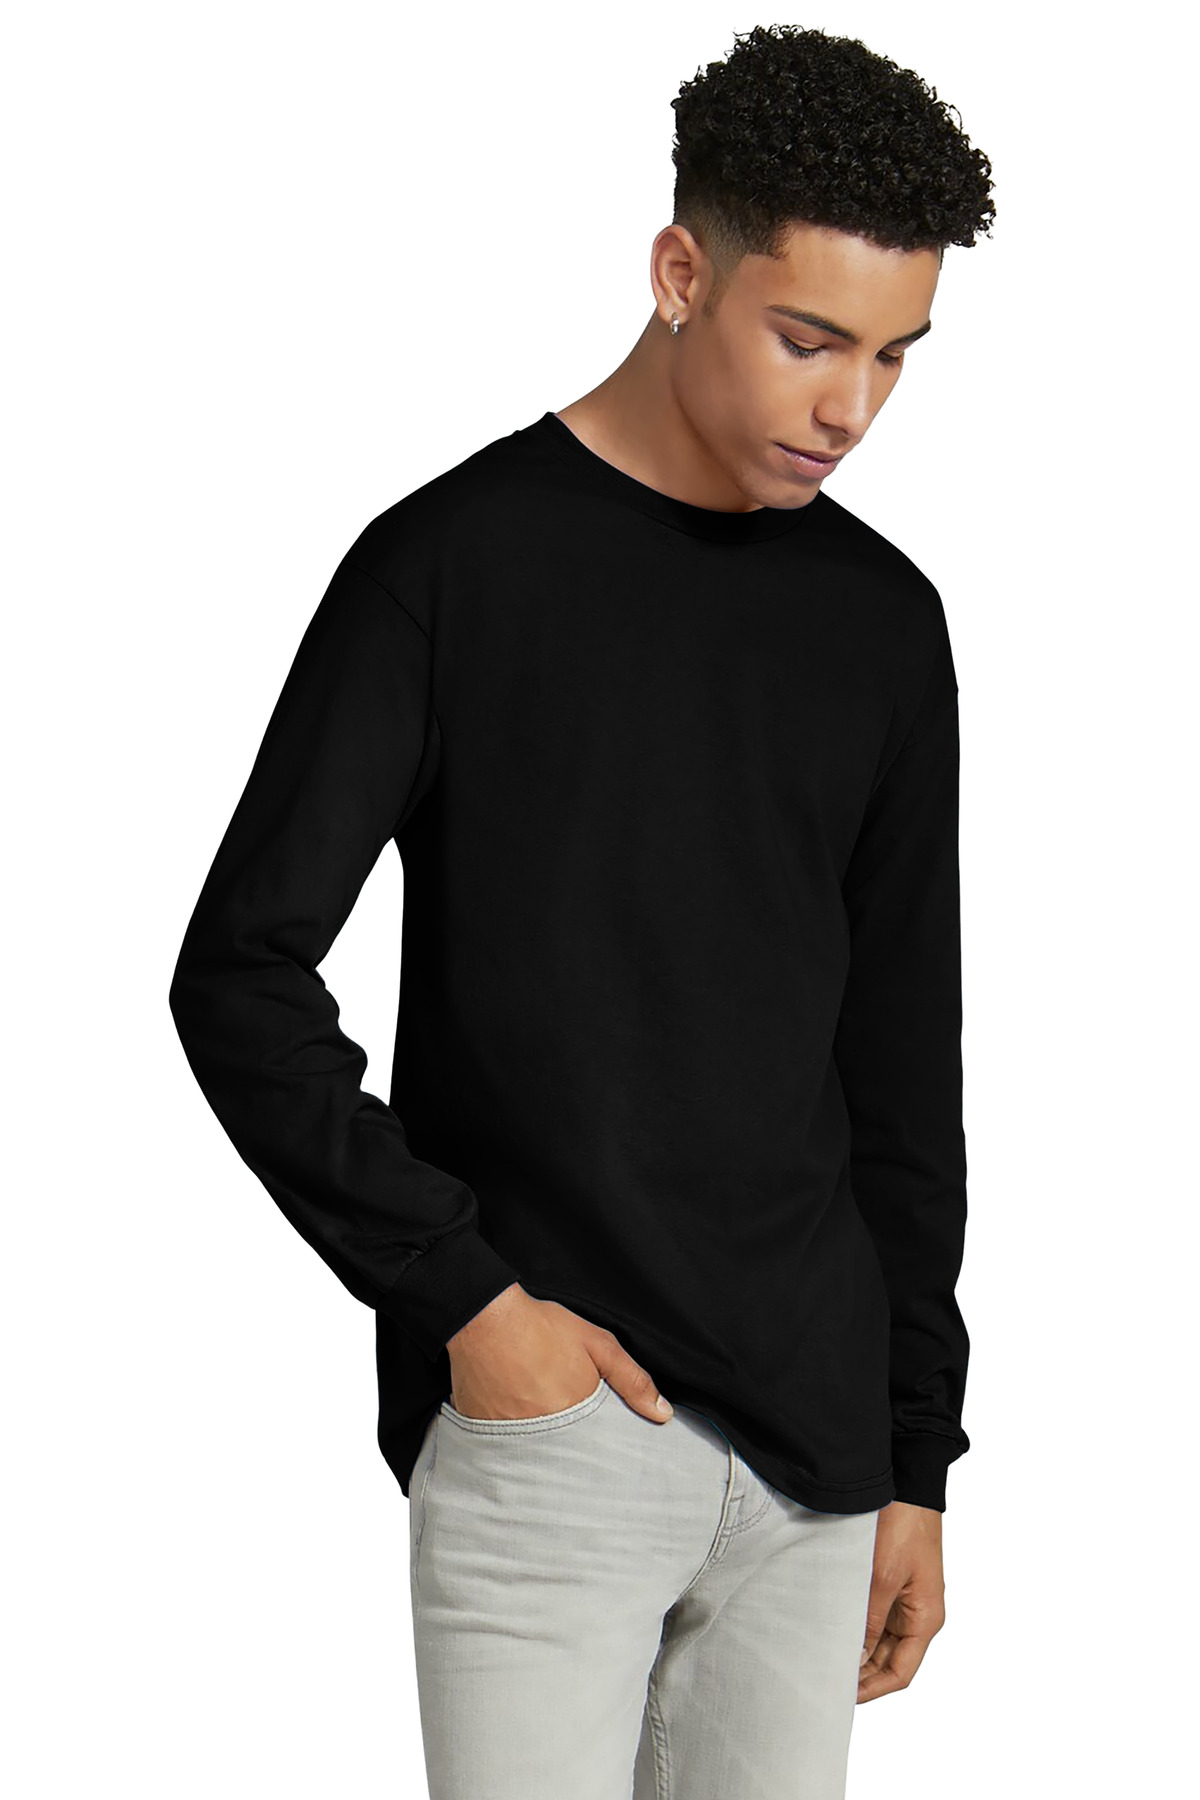 American Apparel Relaxed Long Sleeve T-Shirt 1304W